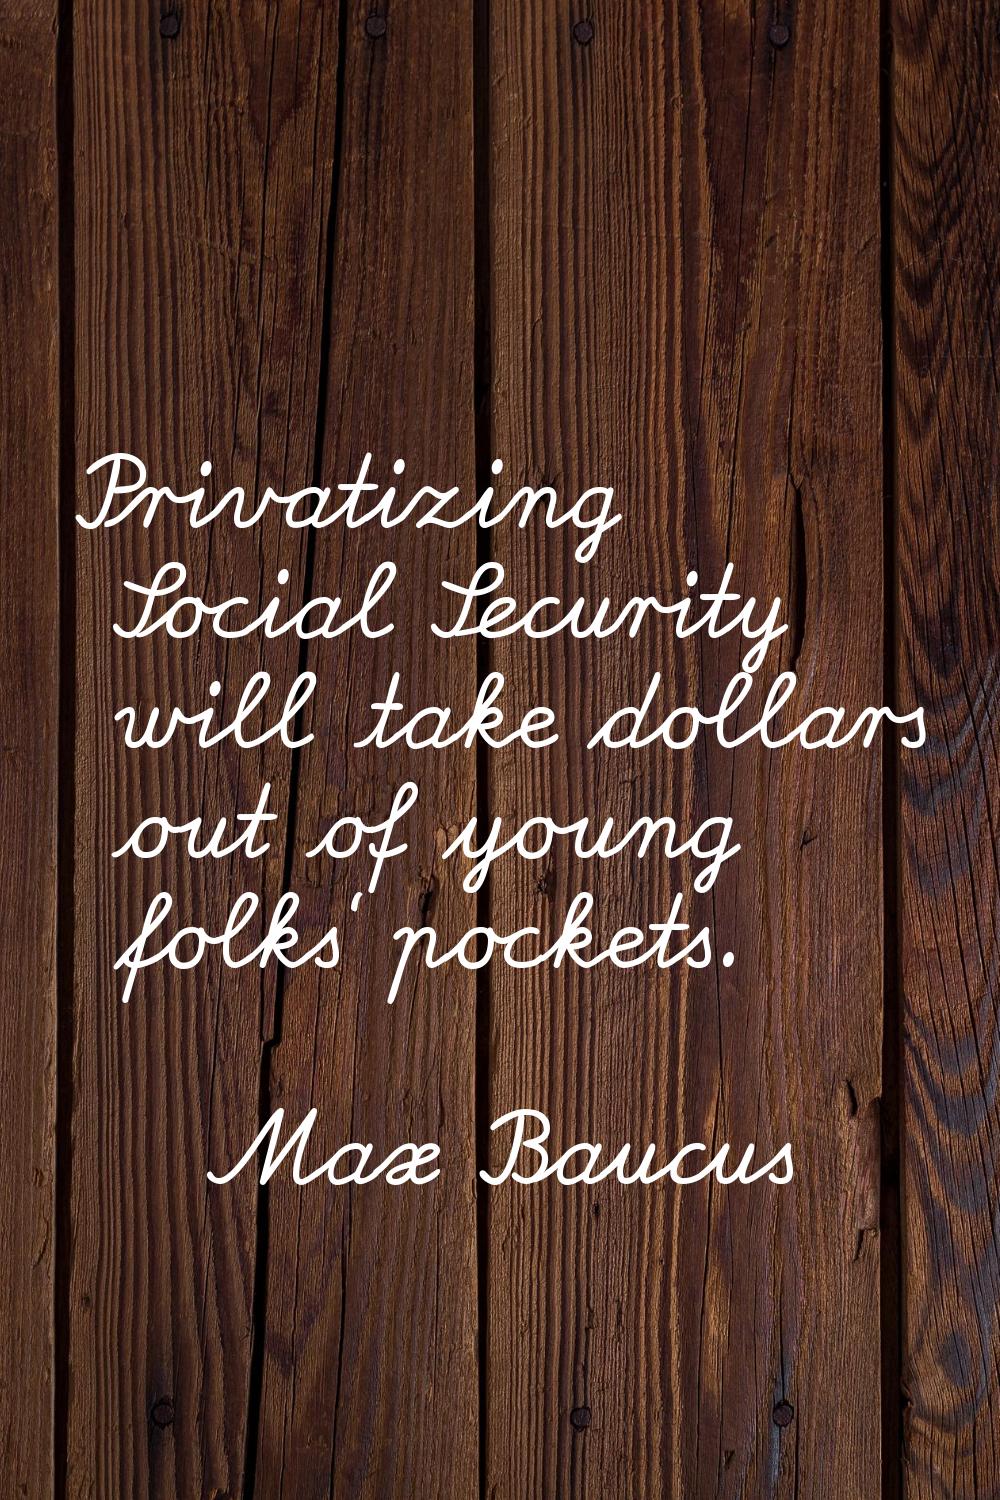 Privatizing Social Security will take dollars out of young folks' pockets.